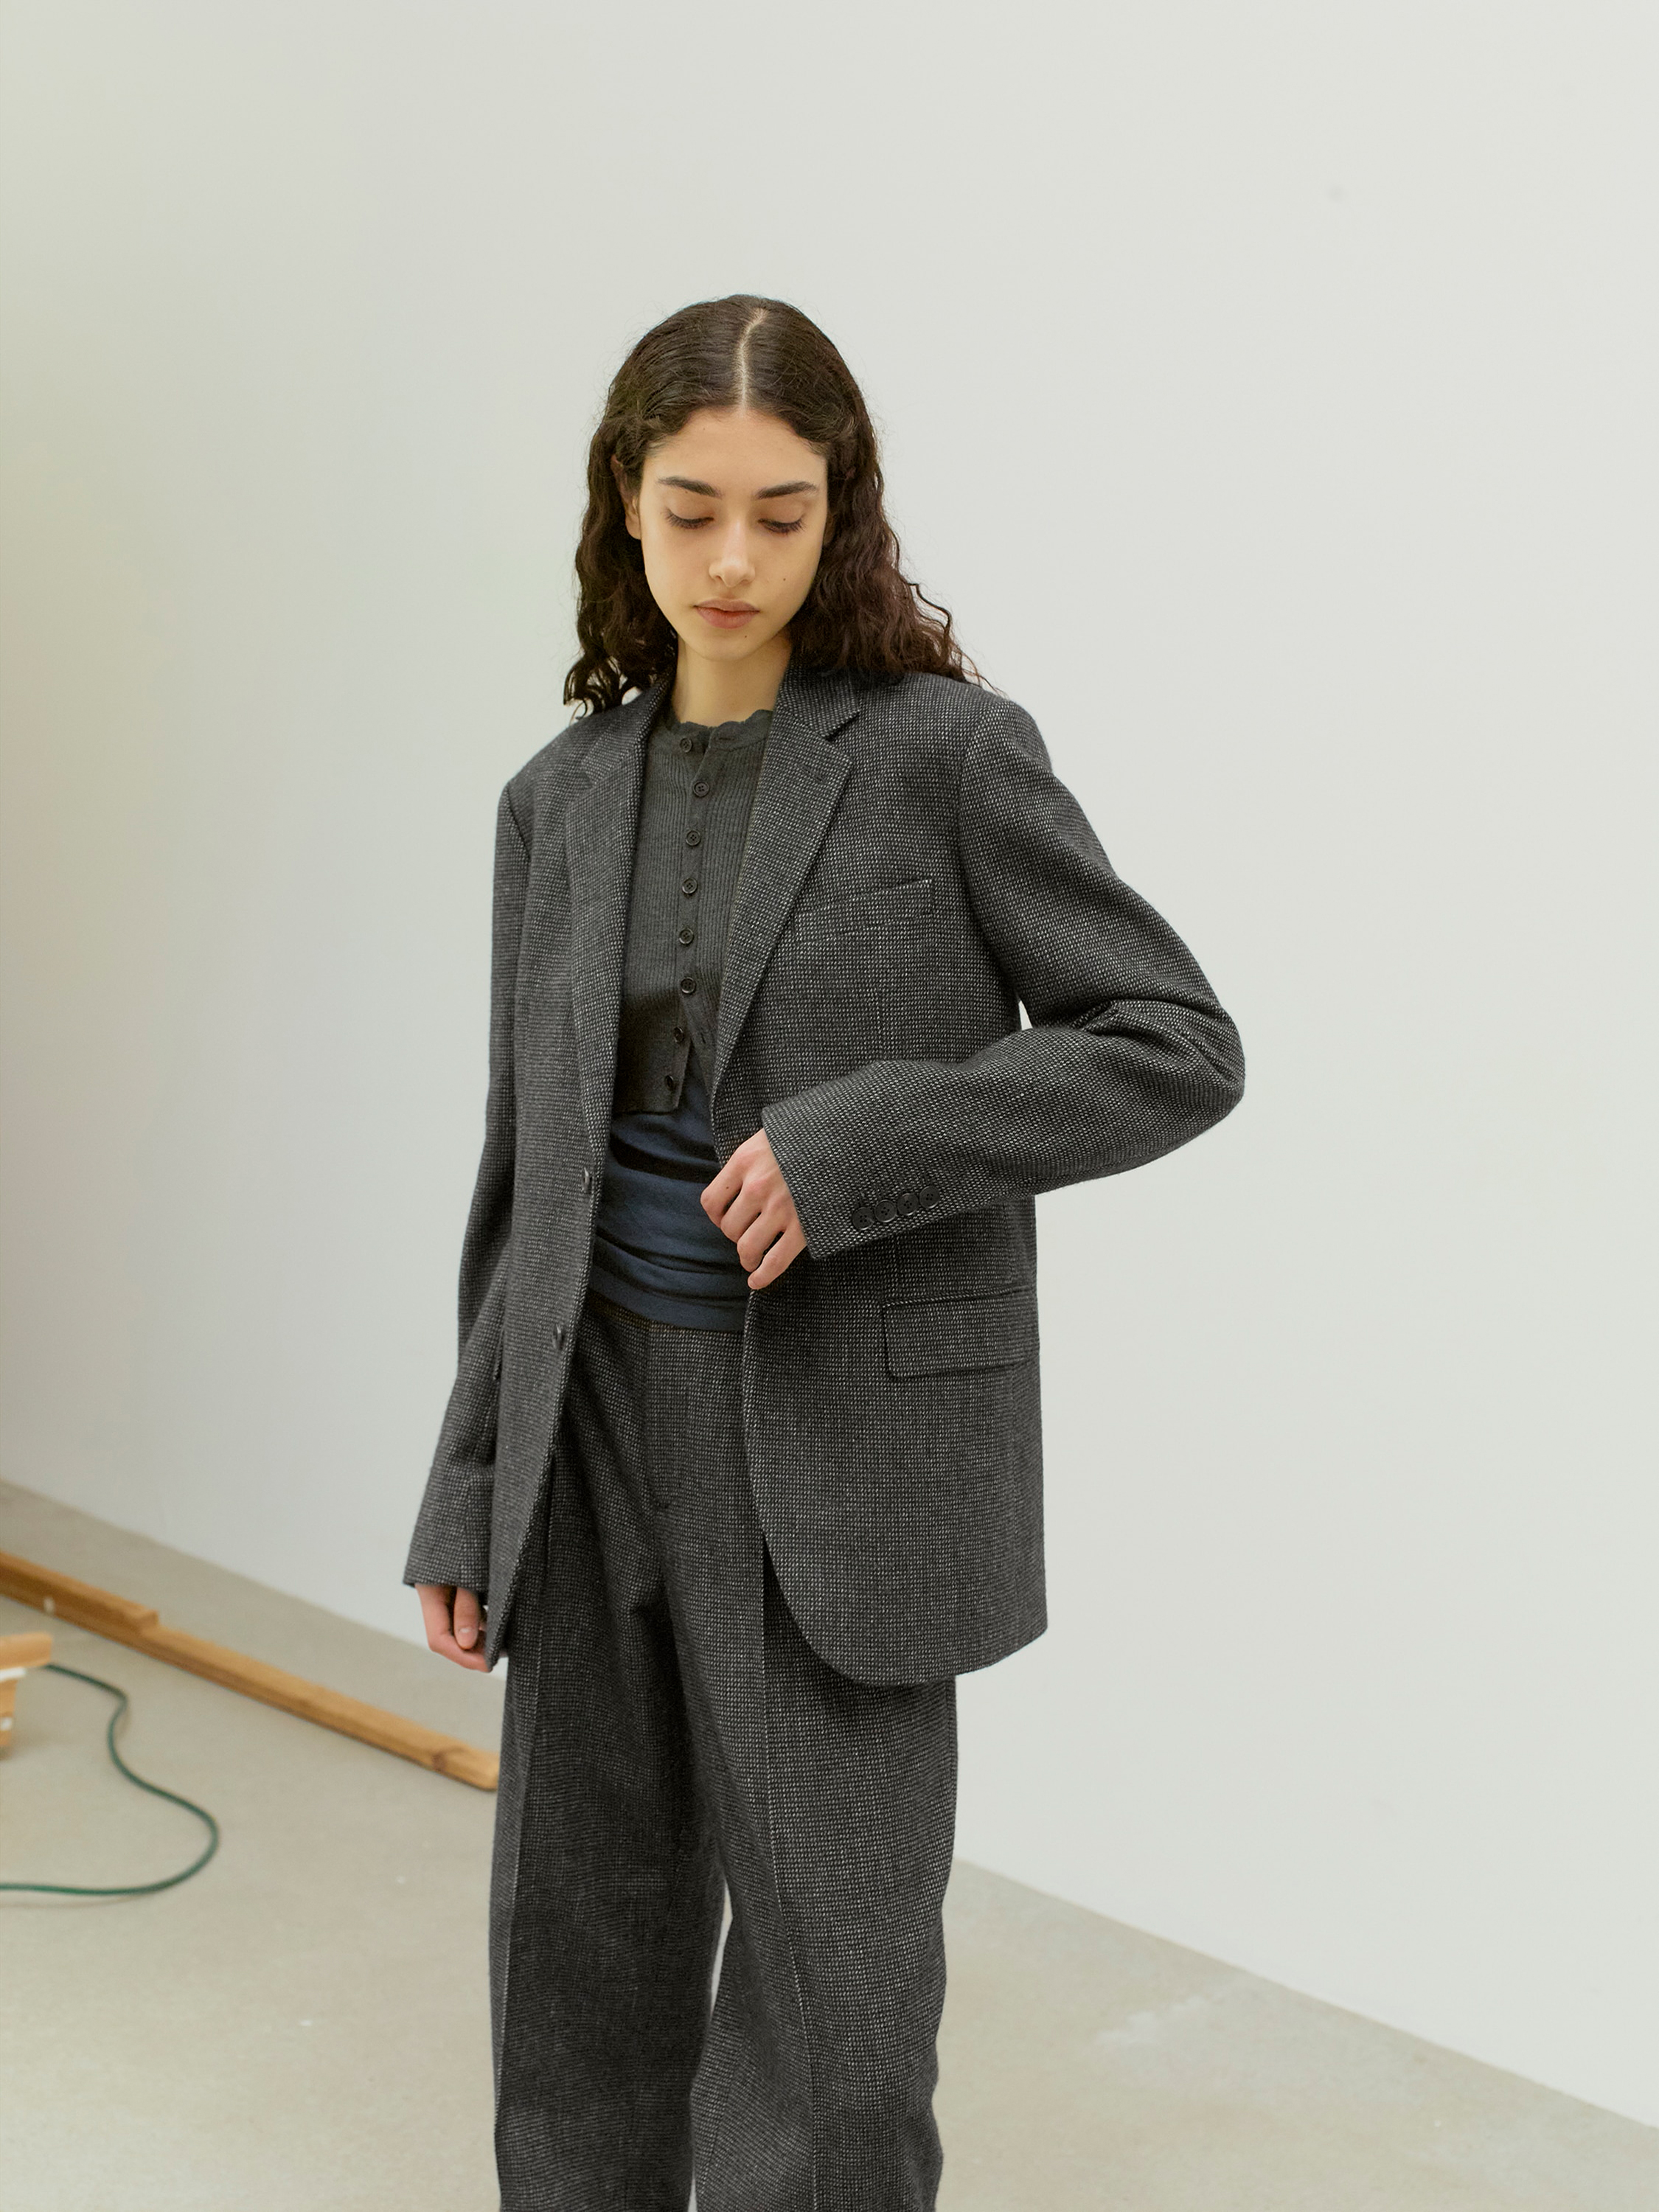 ORGANIC COTTON CASHMERE WOOL TWEED JACKET 詳細画像 TOP CHARCOAL 2